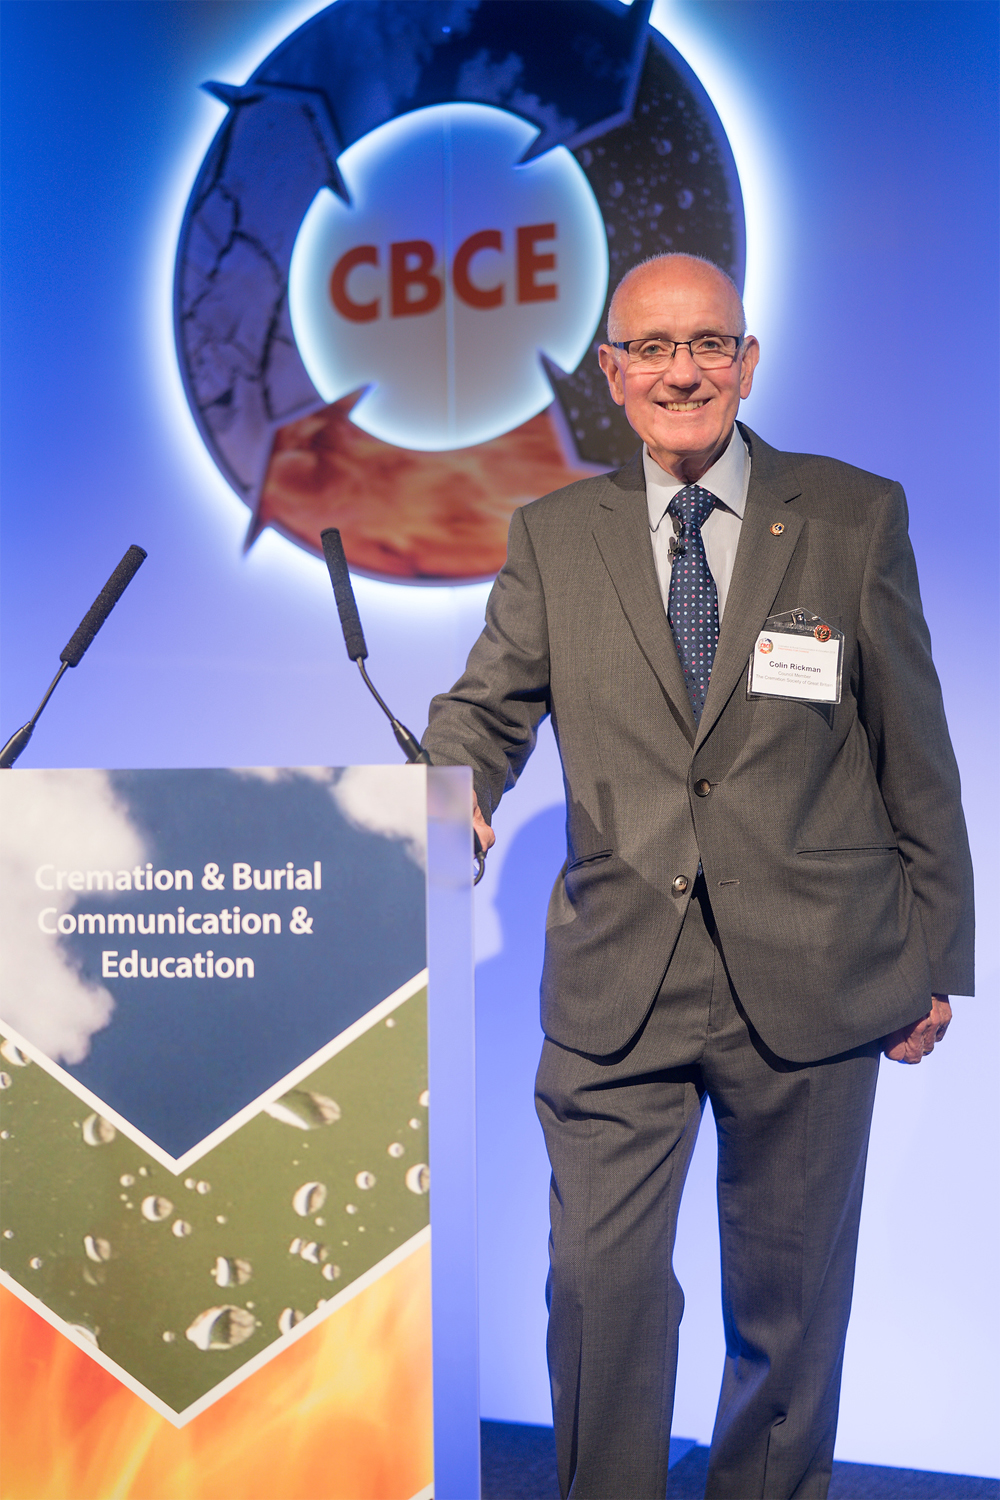 Colin Rickman - Council member of The Cremation Society of Great Britain